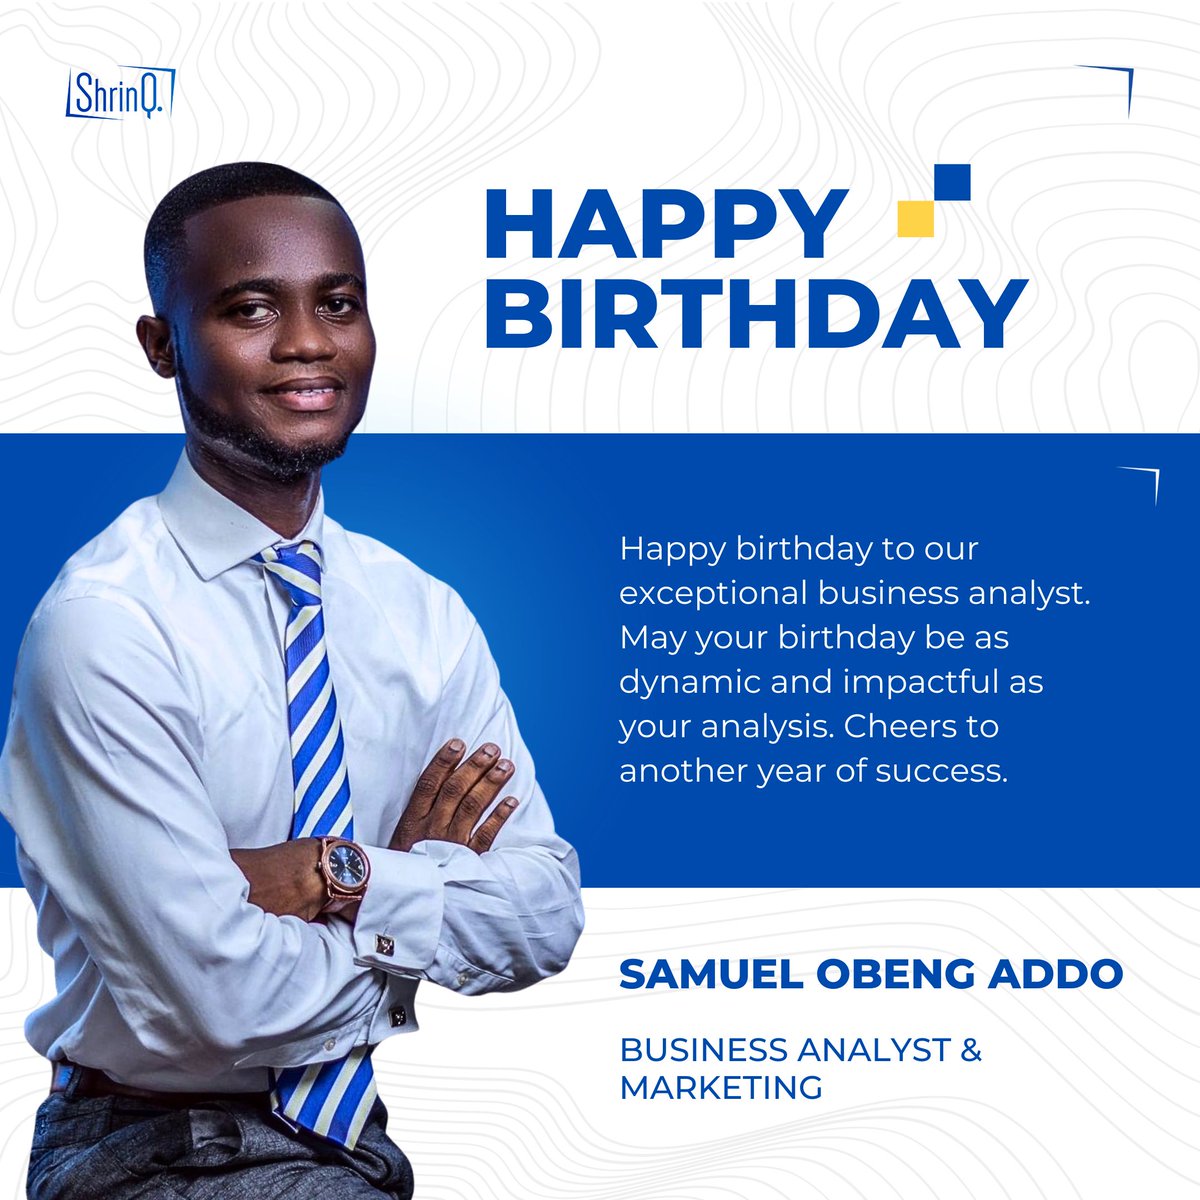 Happy birthday to our amazing Business Analyst & Marketing representative. Cheers to another year of success and innovation. 
#birthdaycelebration #birthday #innovation #softwaredevelopment #businessanalyst #softwarecompany